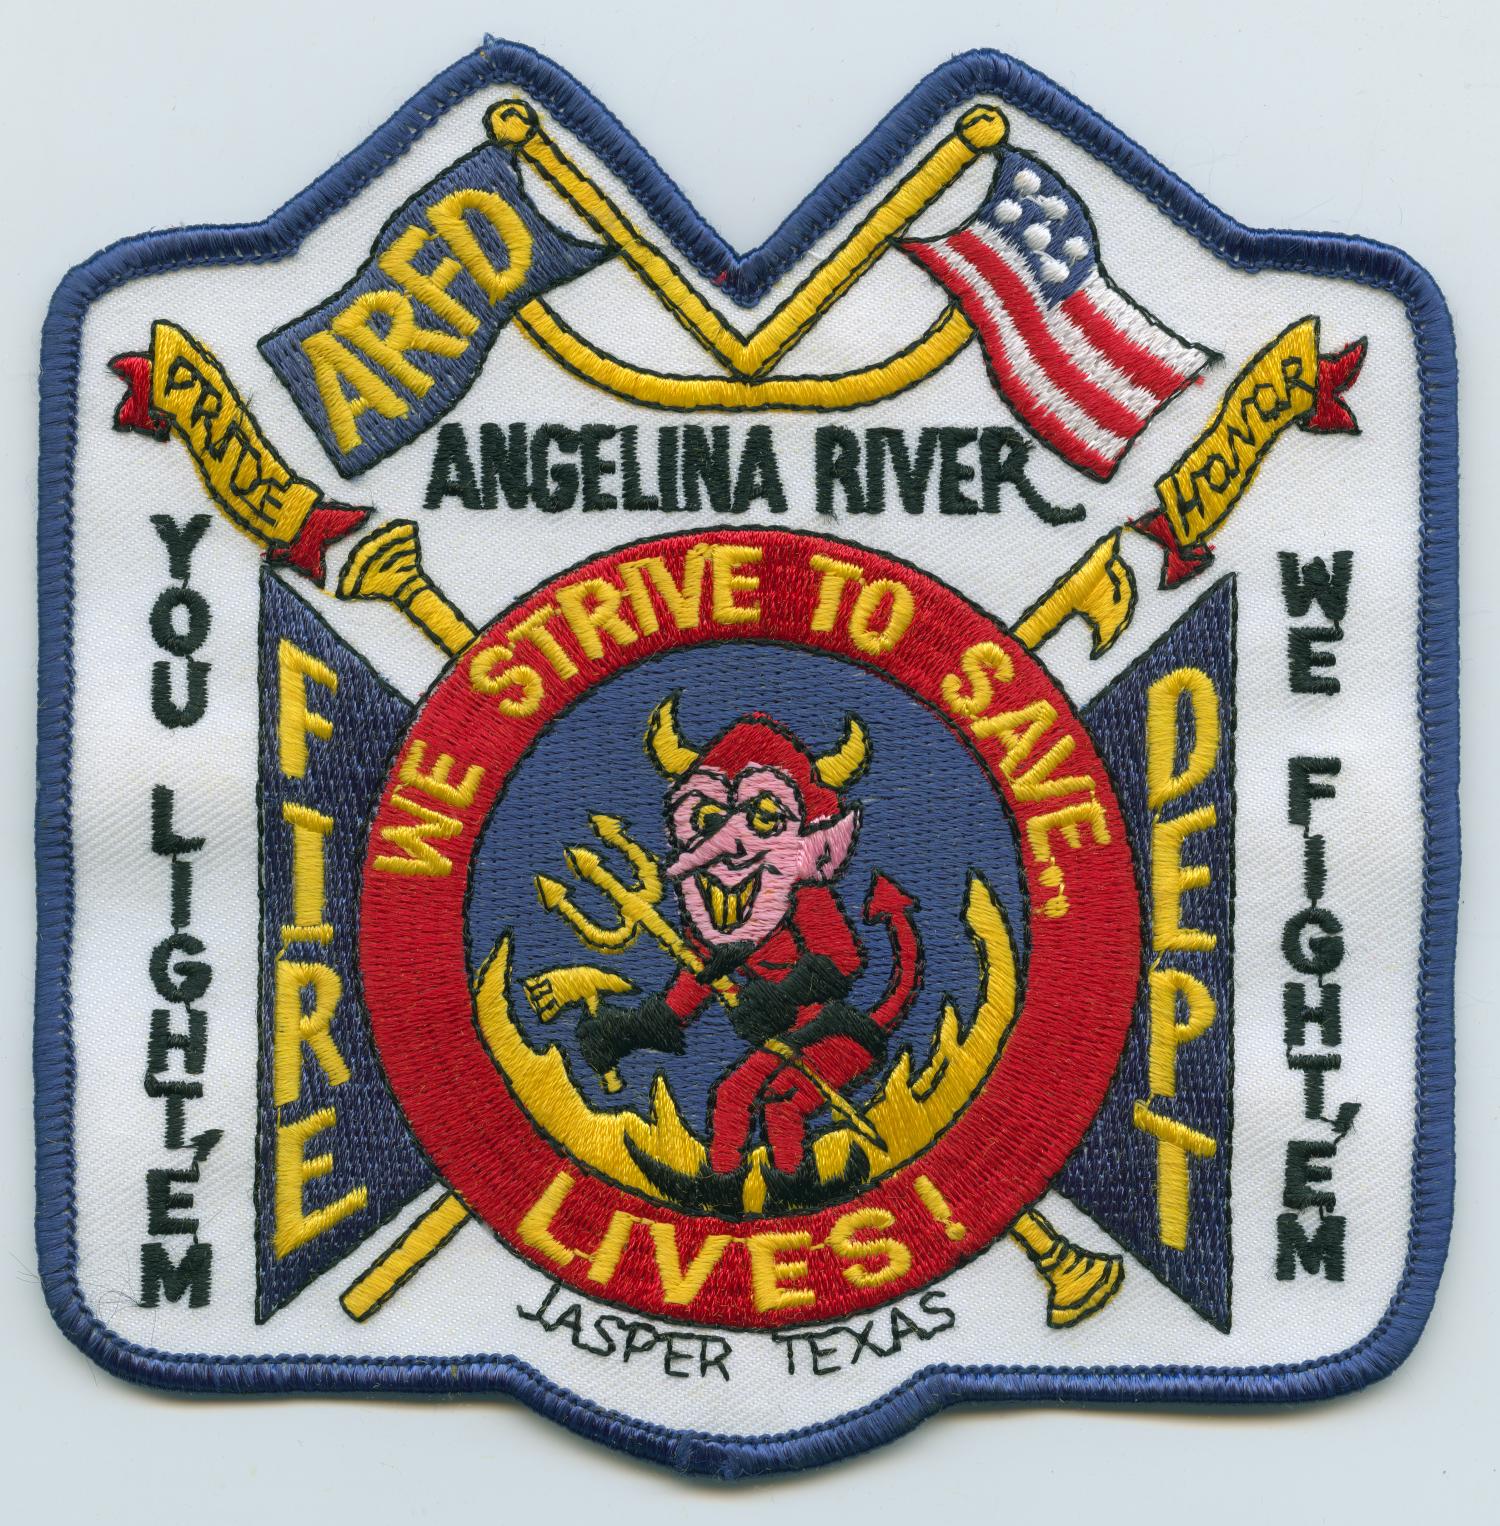 [Angelina River, Texas Fire Department Patch]
                                                
                                                    [Sequence #]: 1 of 2
                                                